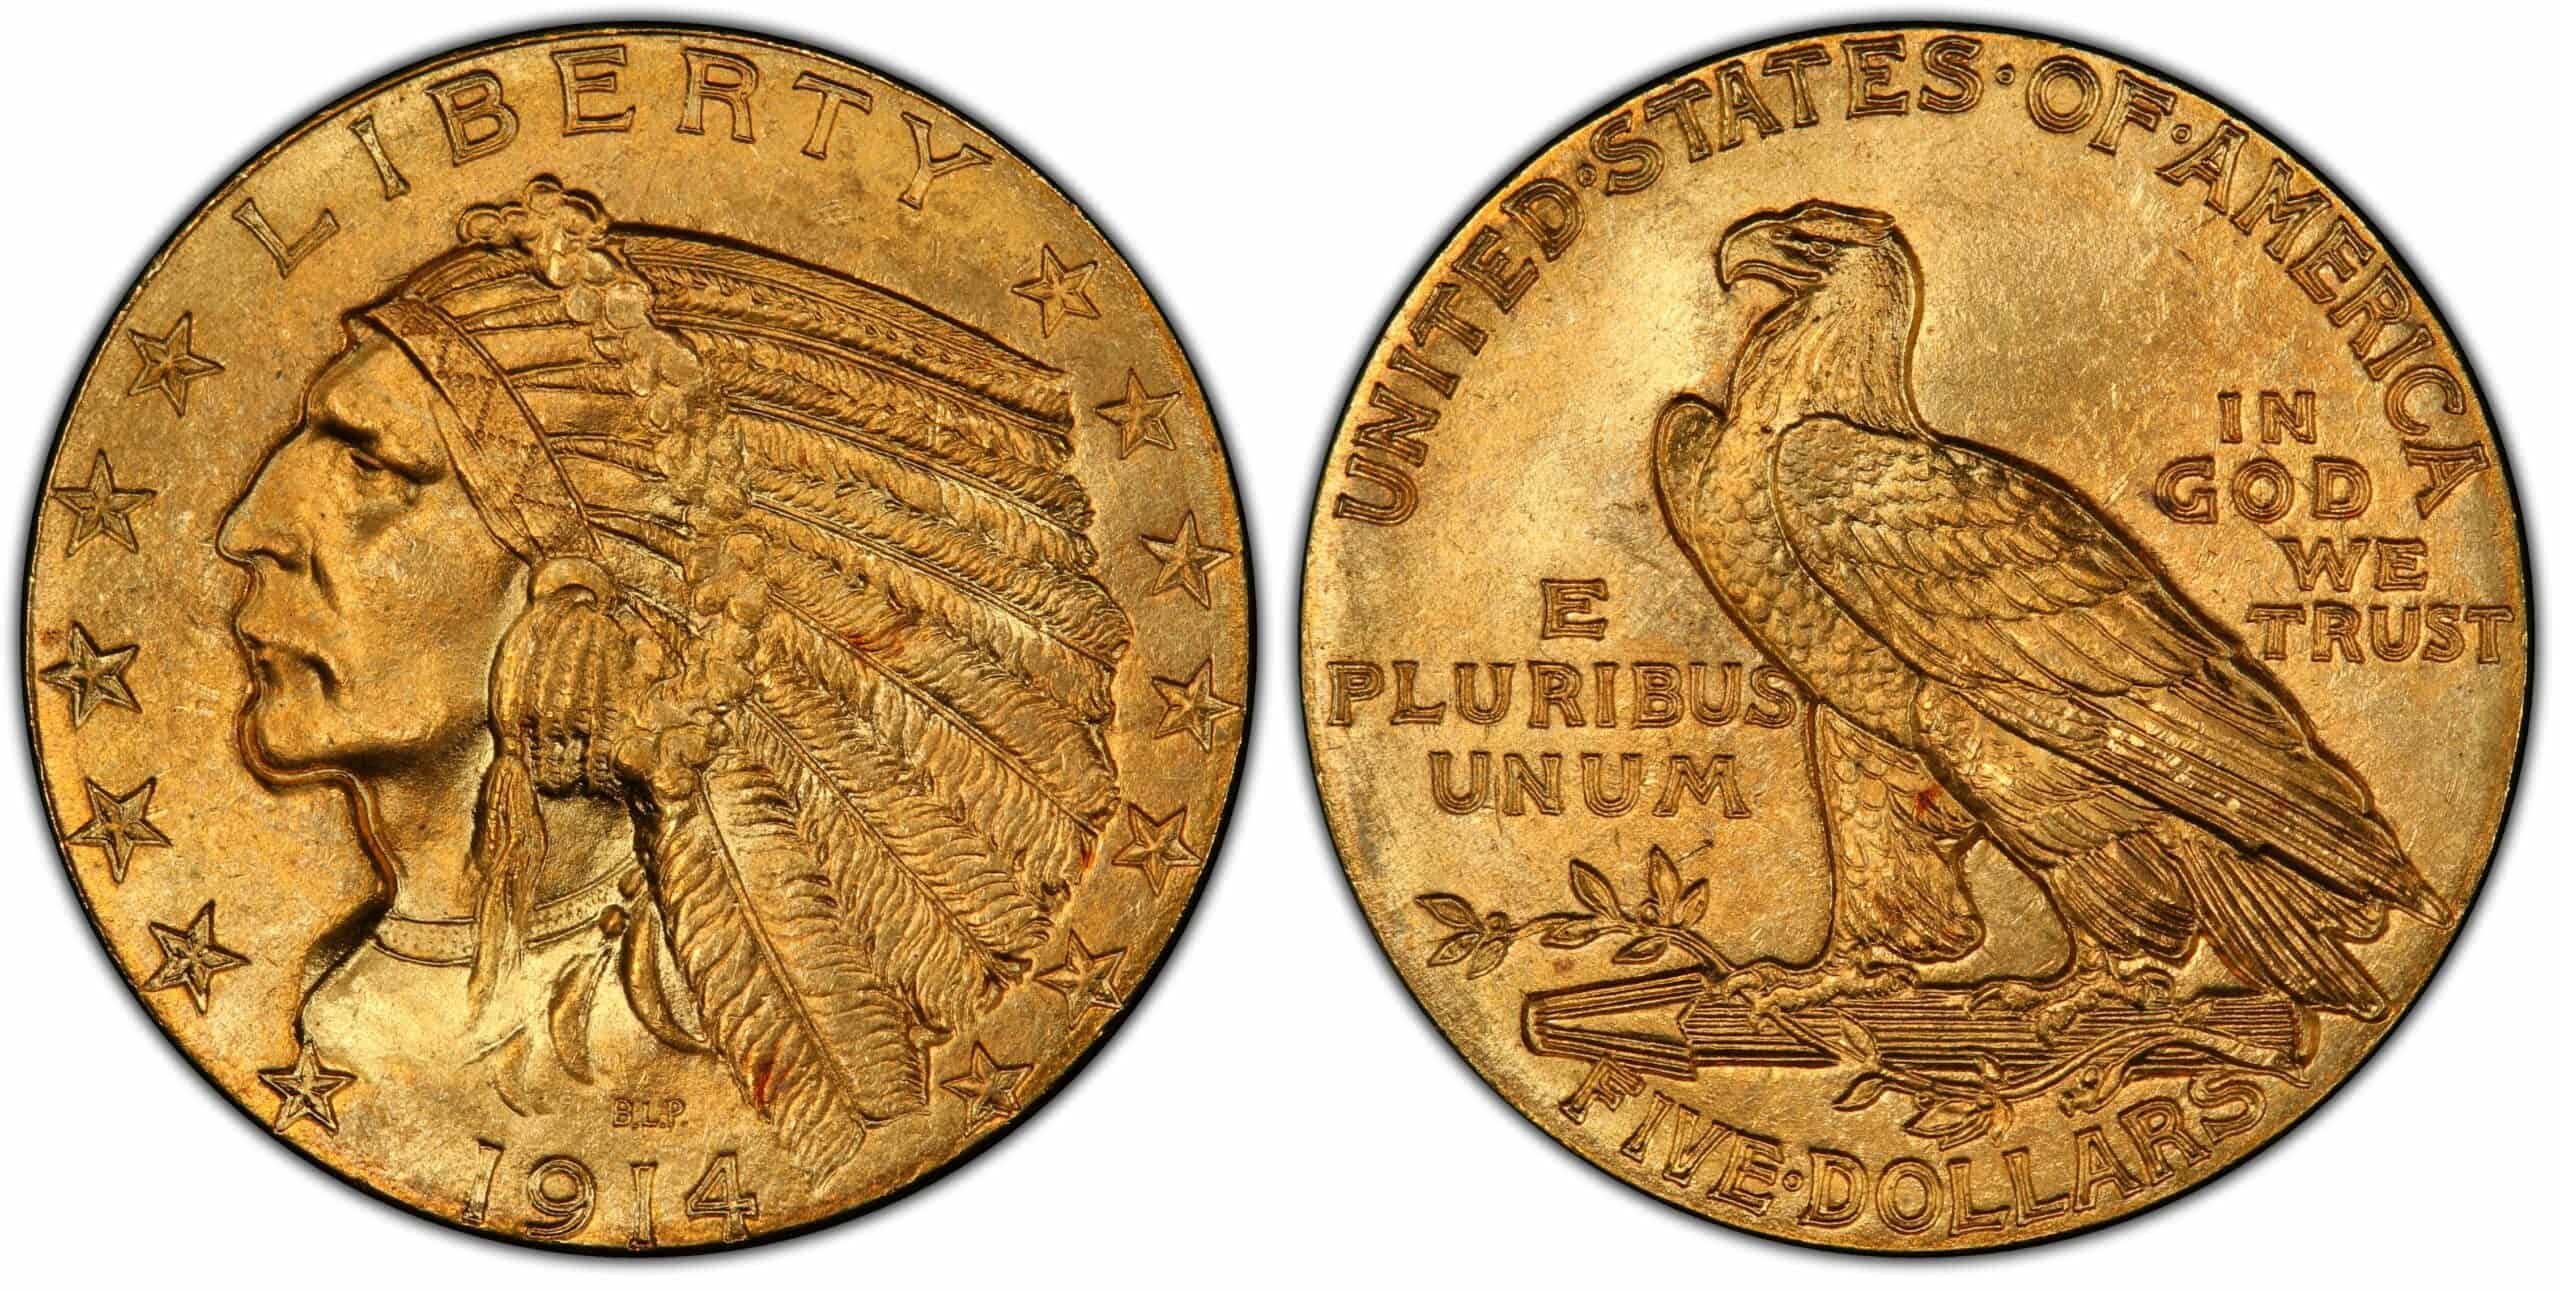 The 1914 Indian $5 gold coin